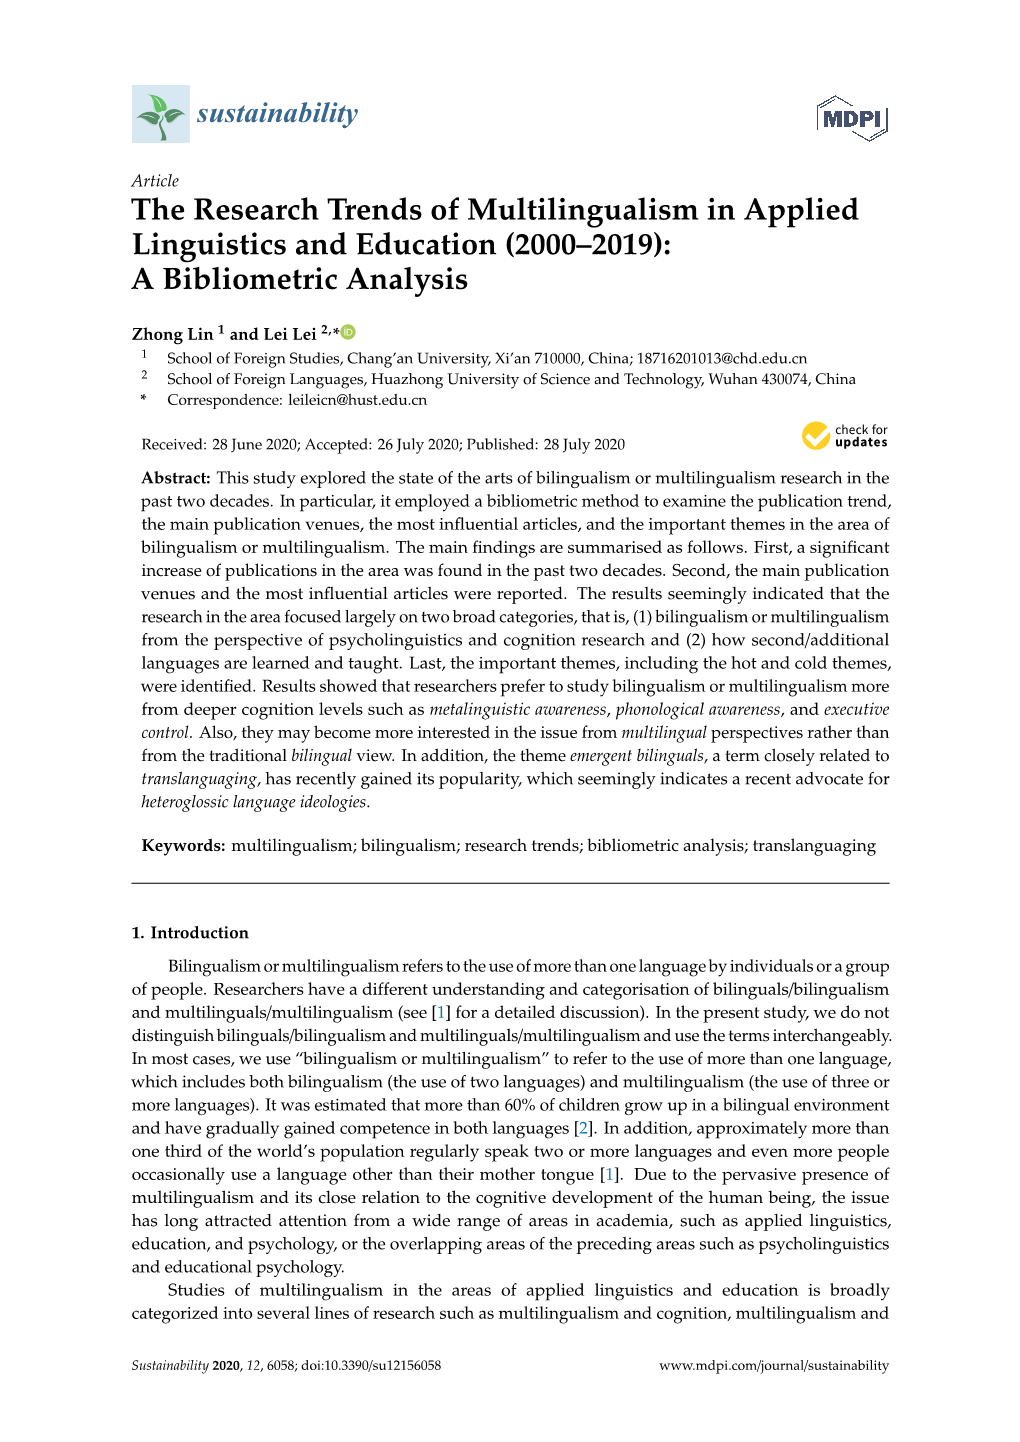 The Research Trends of Multilingualism in Applied Linguistics and Education (2000–2019): a Bibliometric Analysis